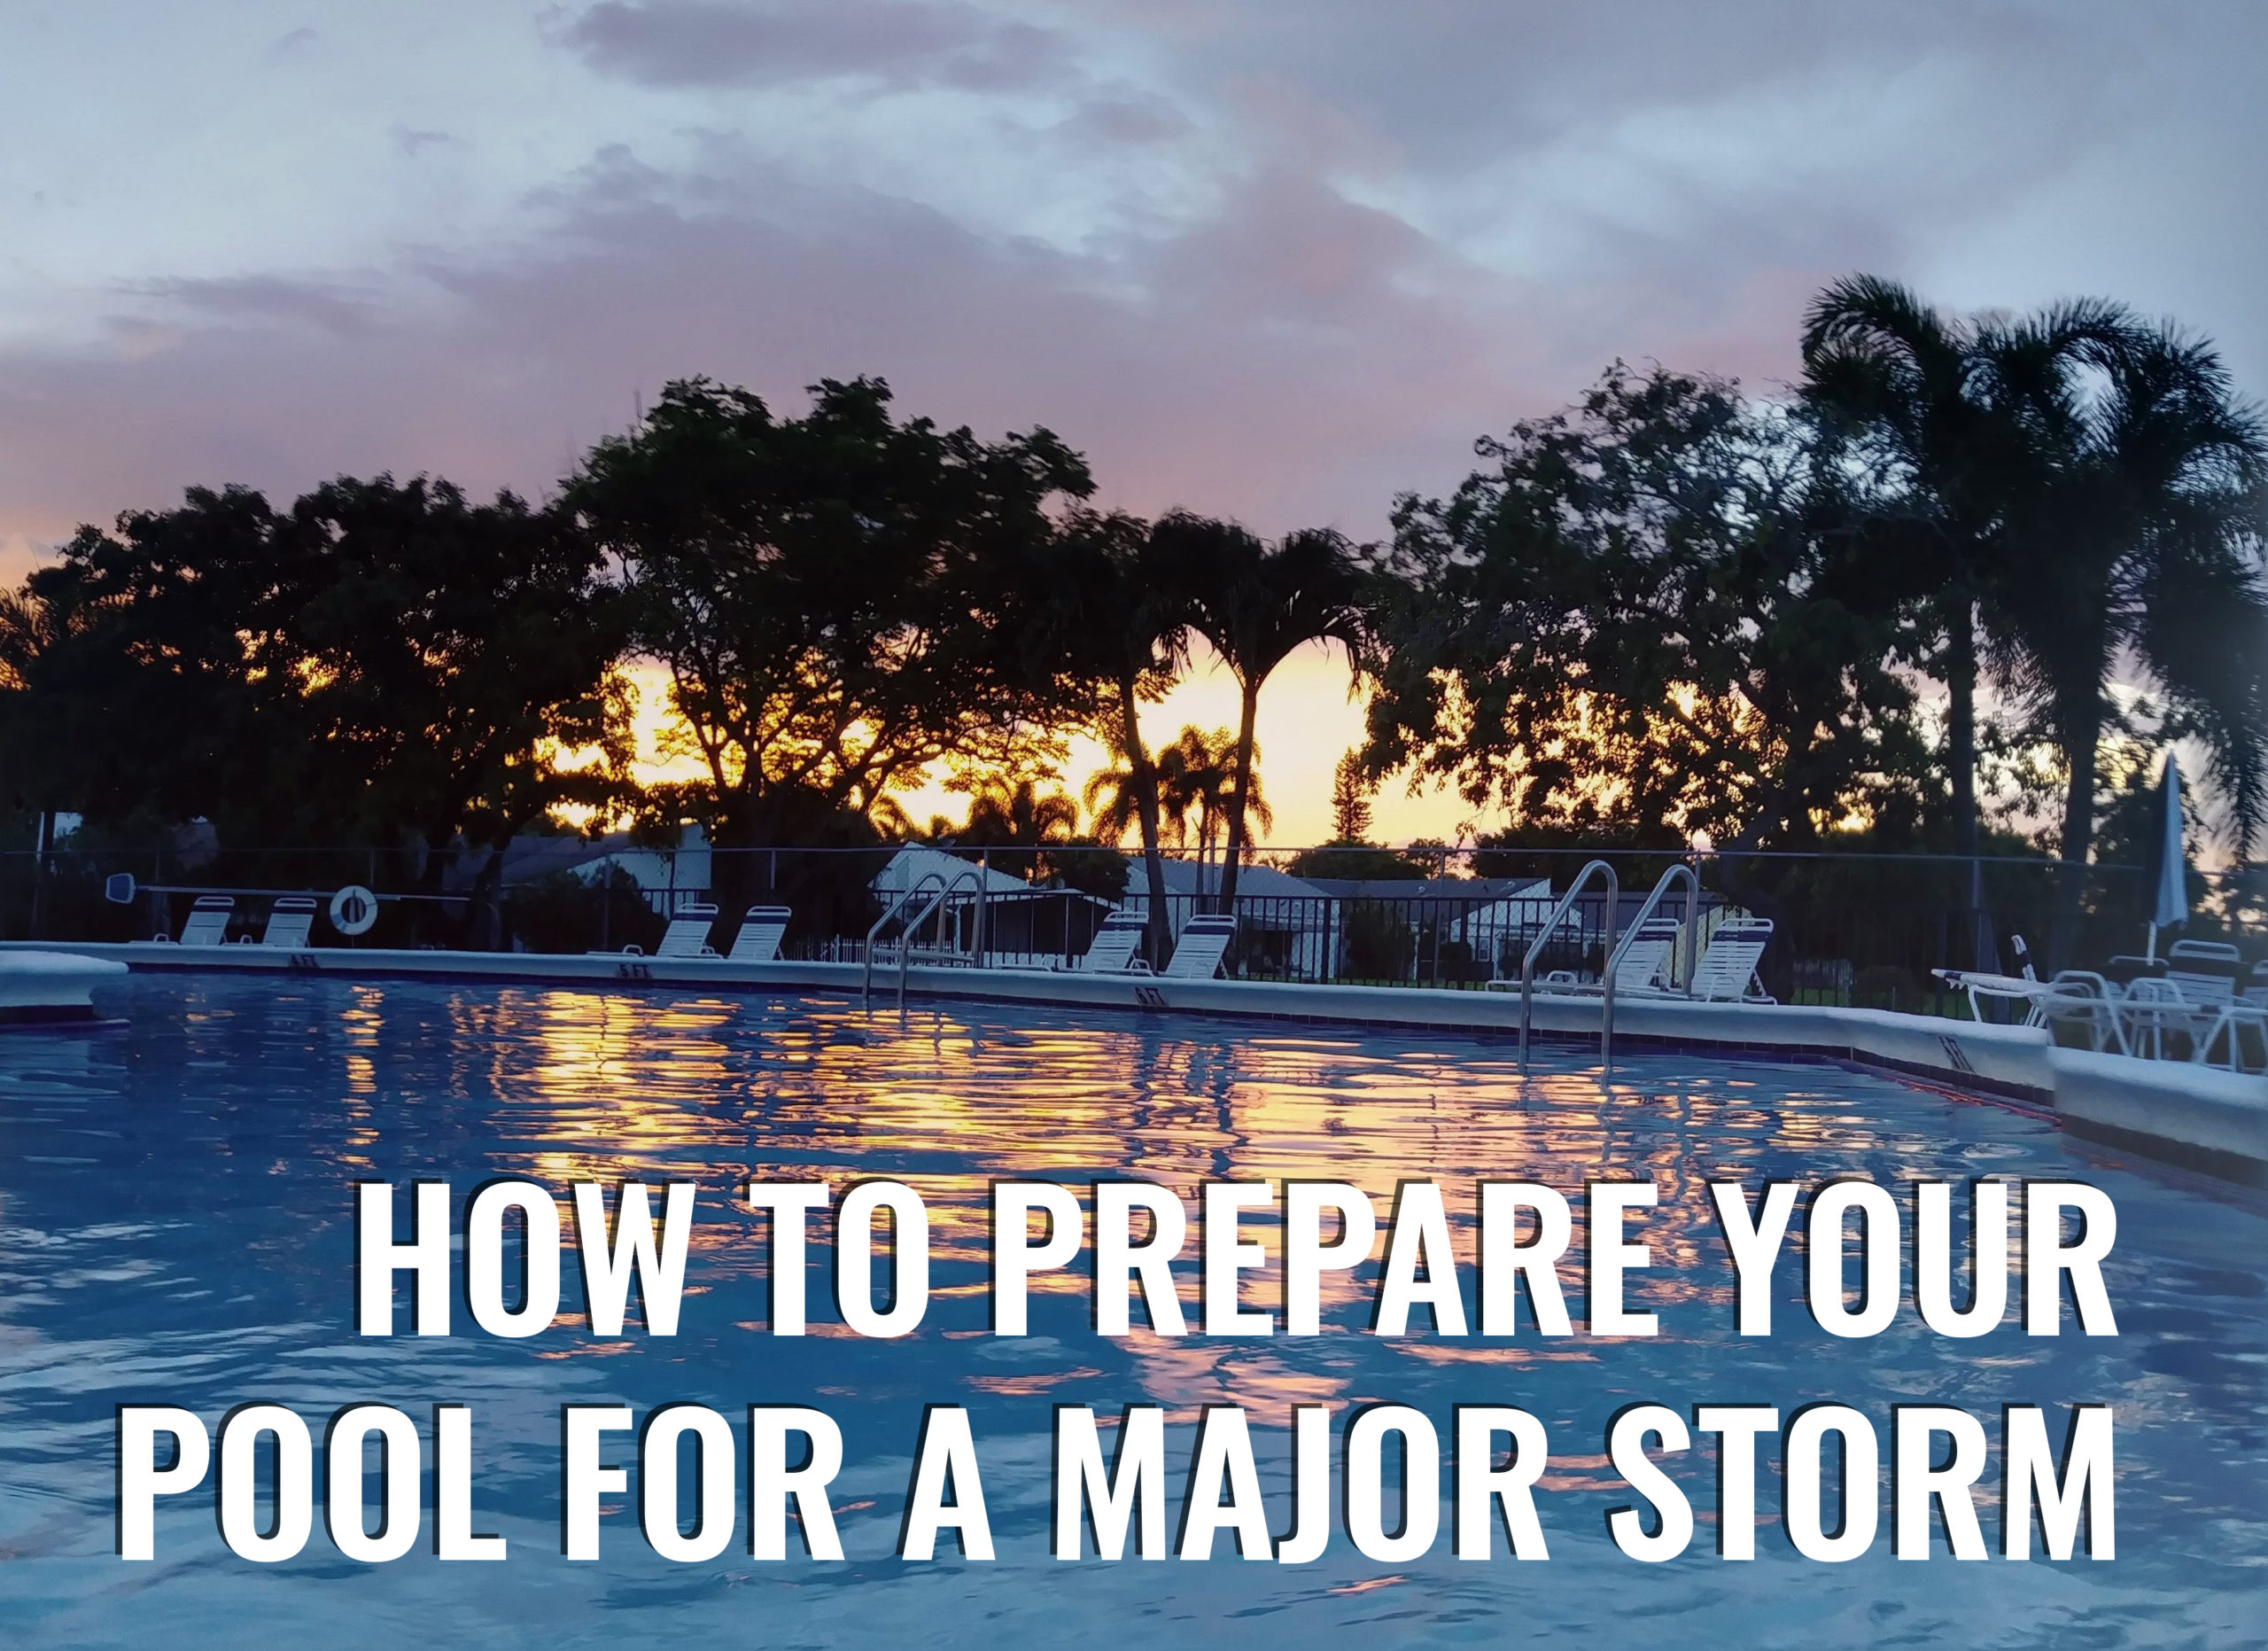 4 Tips on How to Prepare your Pool for a Storm - Coversafe.com